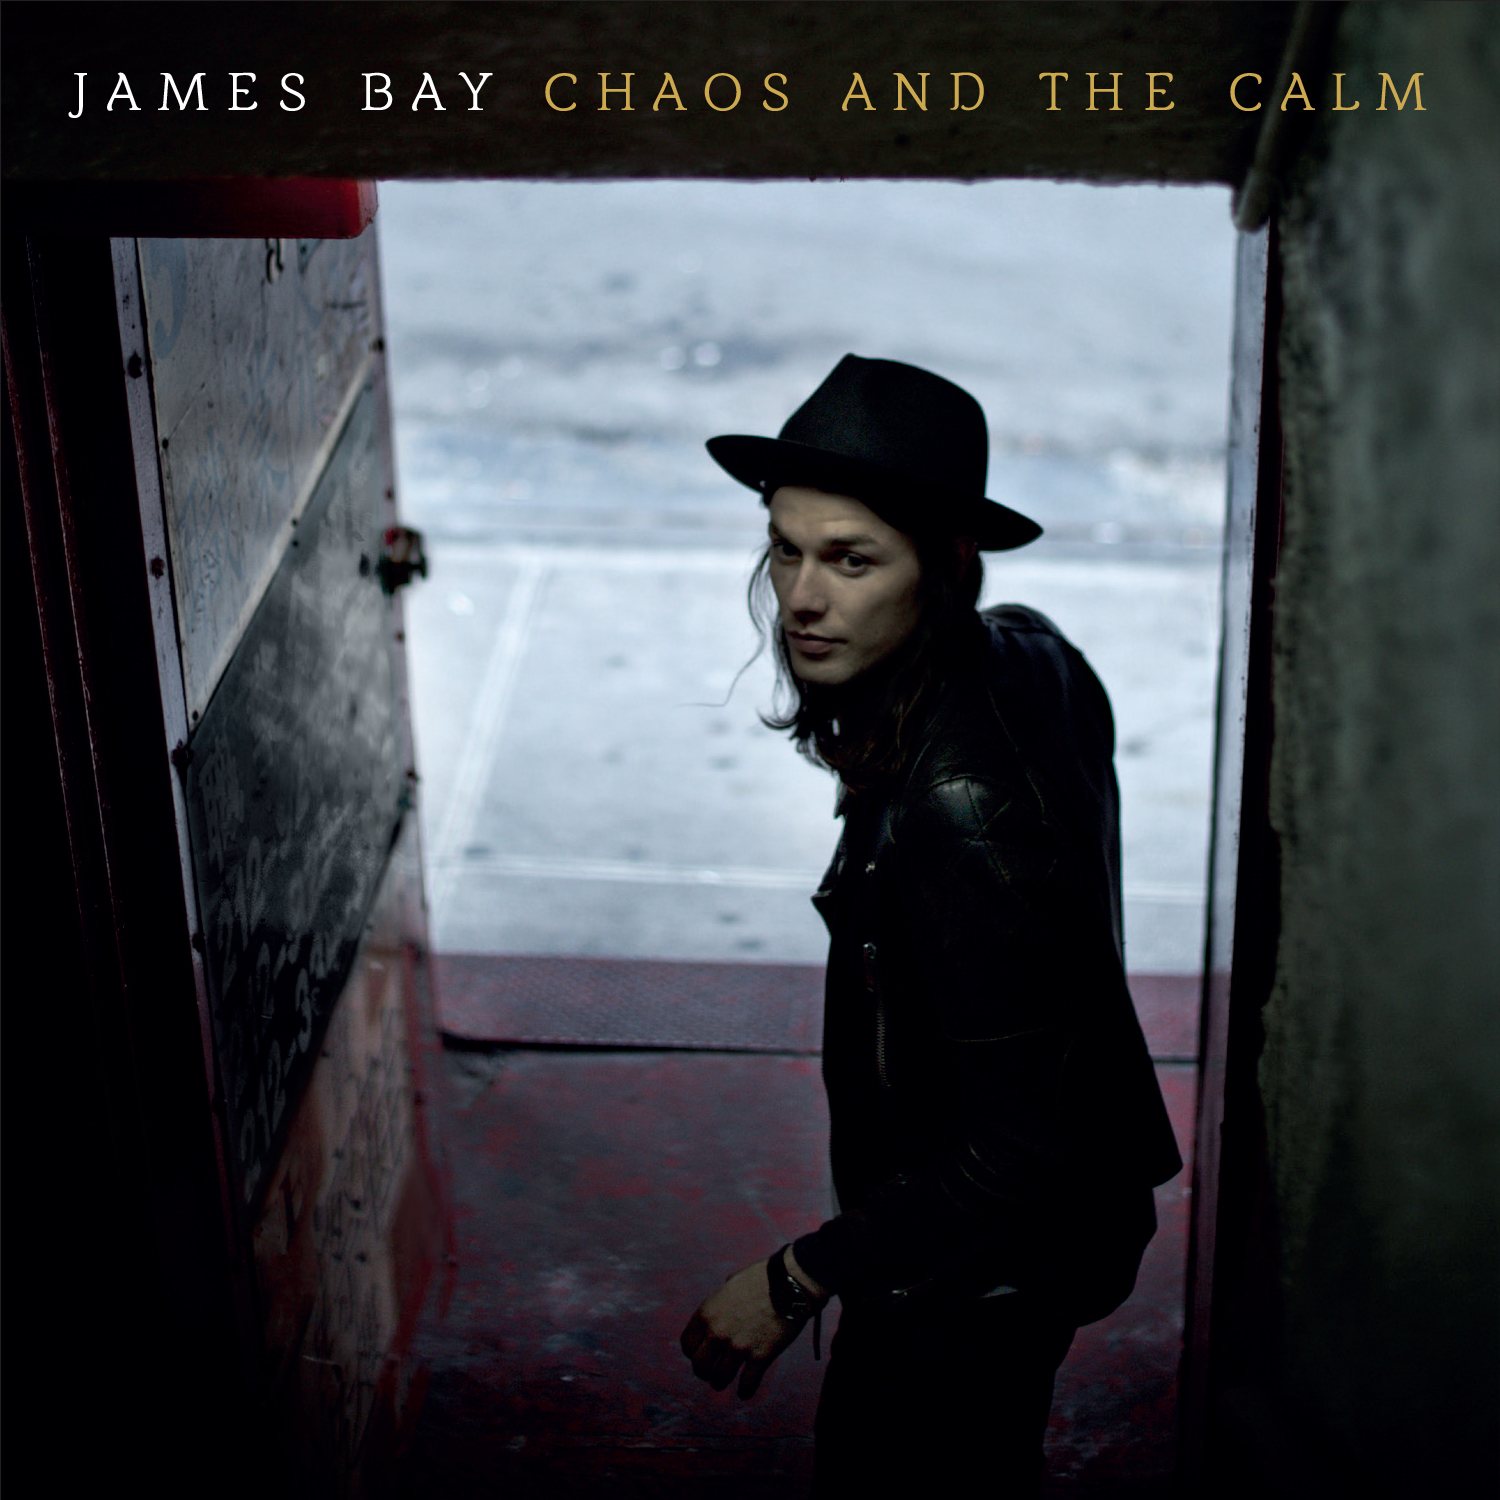 James Bay Chaos and the calm.jpg